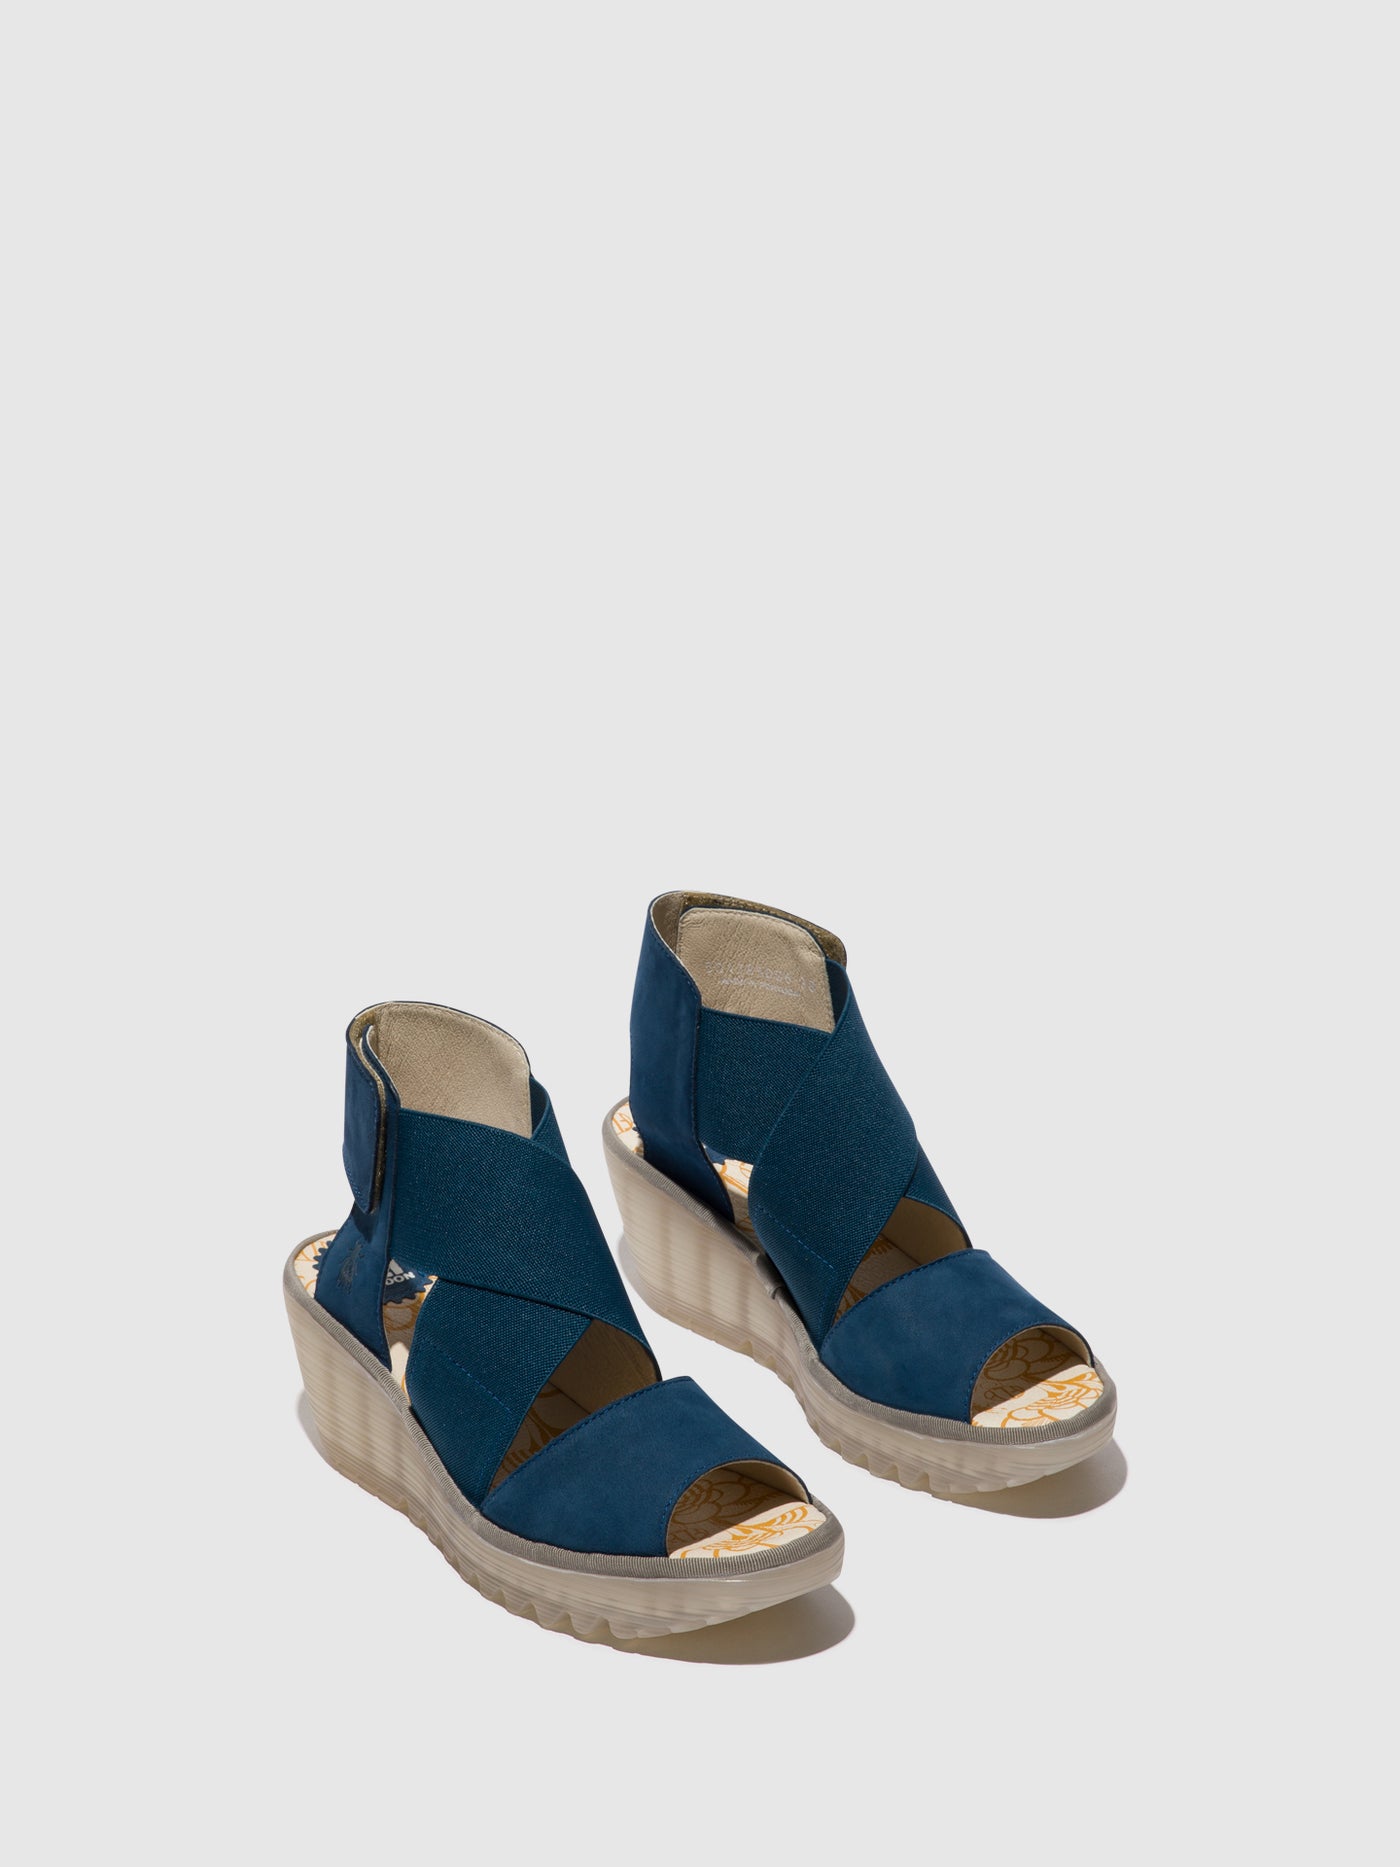 Crossover Sandals YUBA385FLY BLUE